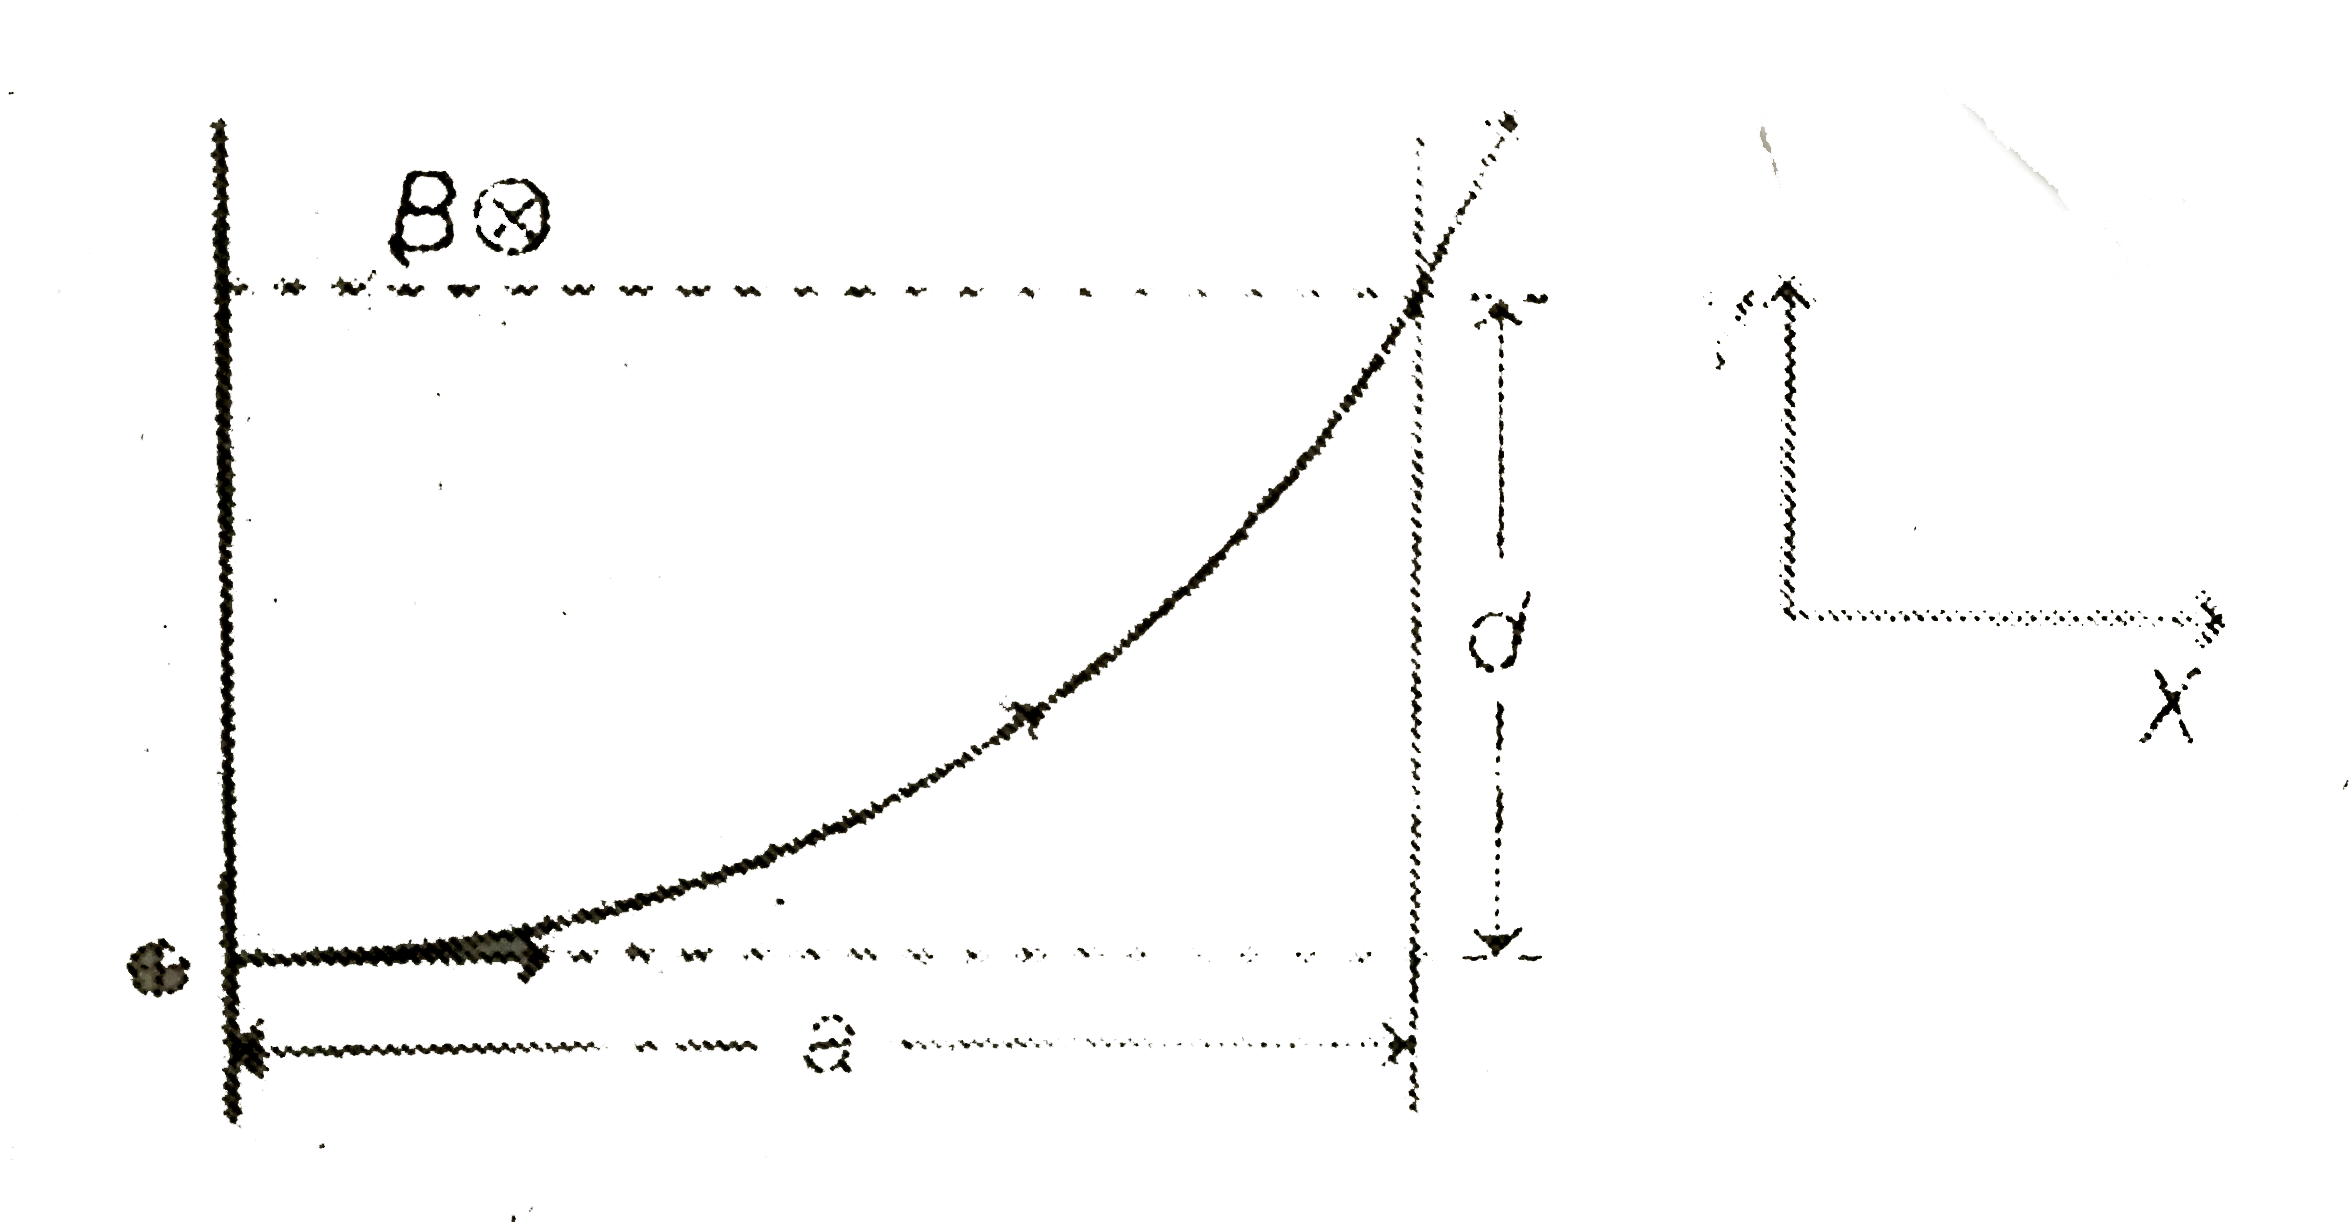 A particle of charge+q eneters a region of uniform magnetic field B (directed into the plane of paper) as shown in the figure. Particle is deflected by a distance d along y-axis after travelling a distance of a along x axis. Find magnitude of linear momentum of particle in Newton-sec. (Given: a=3m, d=4m, Bq=0.32c-Tesla)